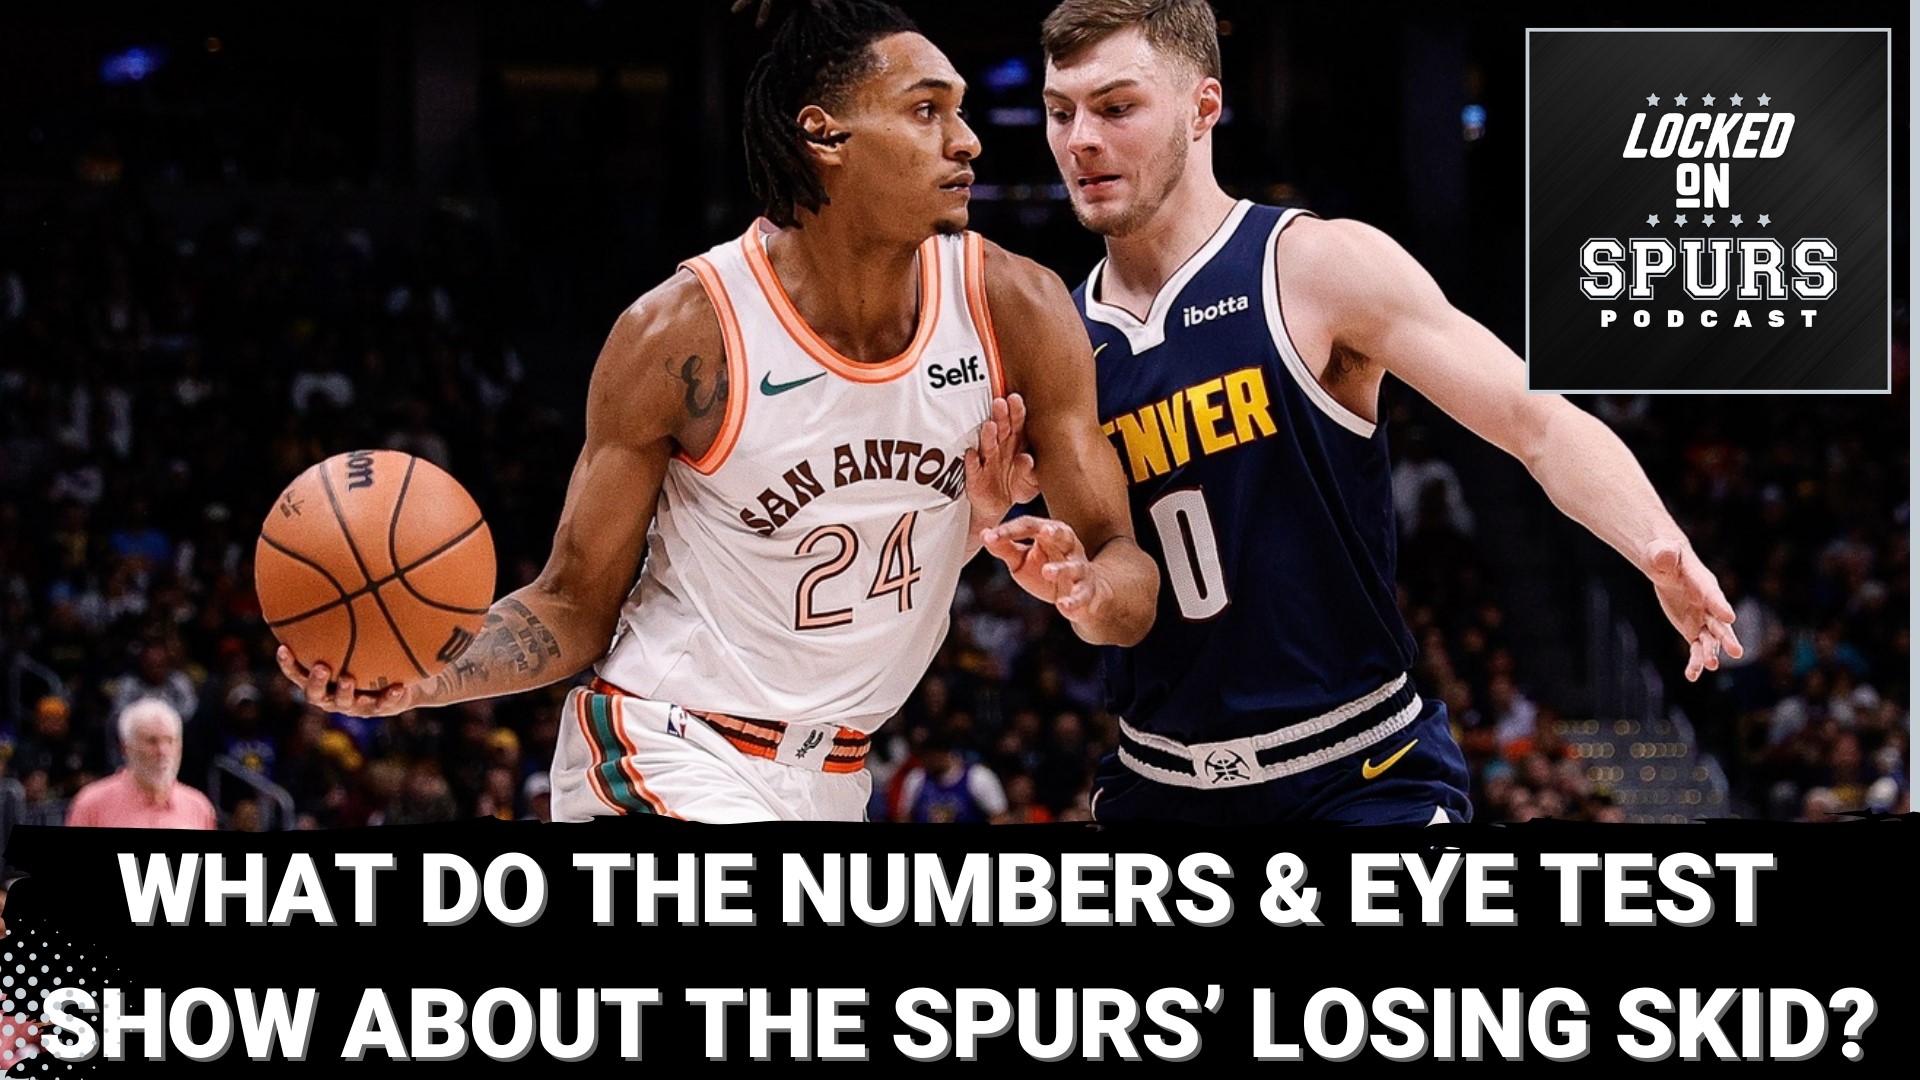 What do the Spurs' losing skid numbers and eye test tell us?